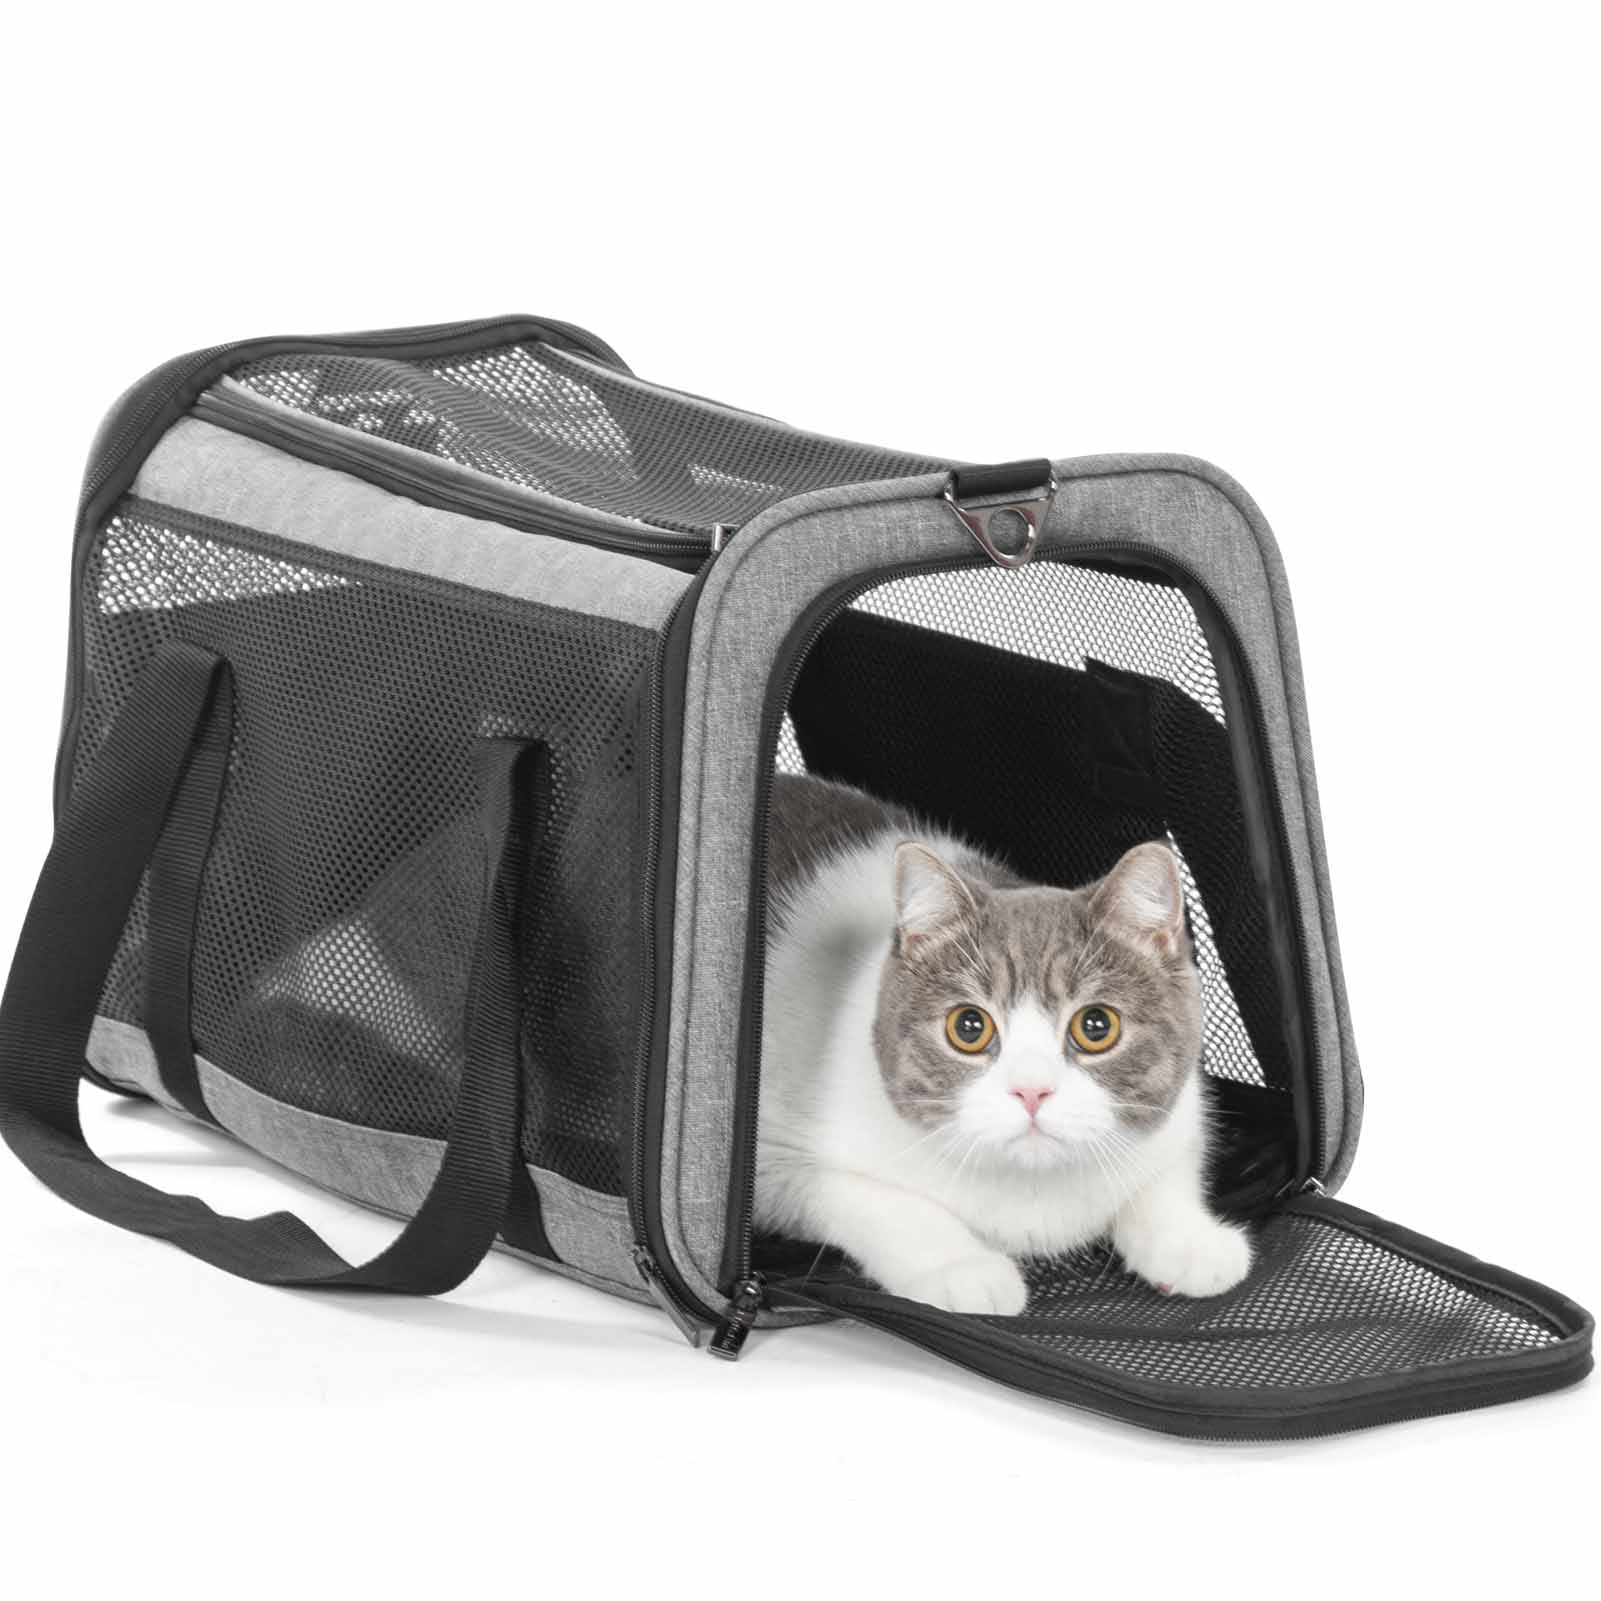 PETSFIT Large Capacity Lightweight Washable Soft-Sided Pet Travel Carrier